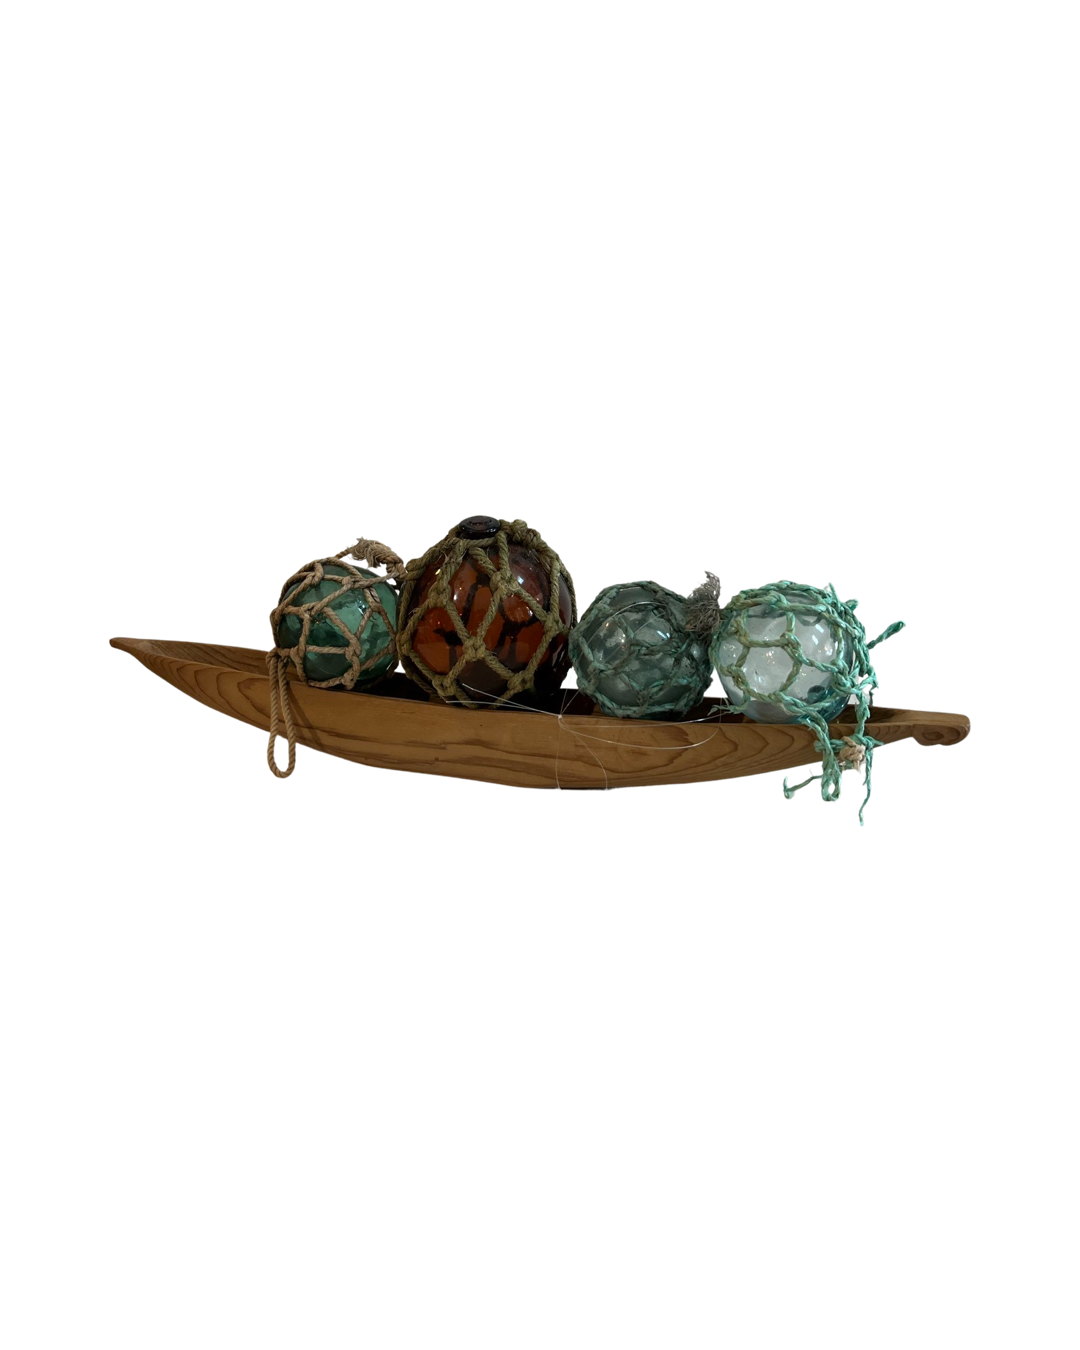 Native Carved Canoe with 4 Glass Ball Floats